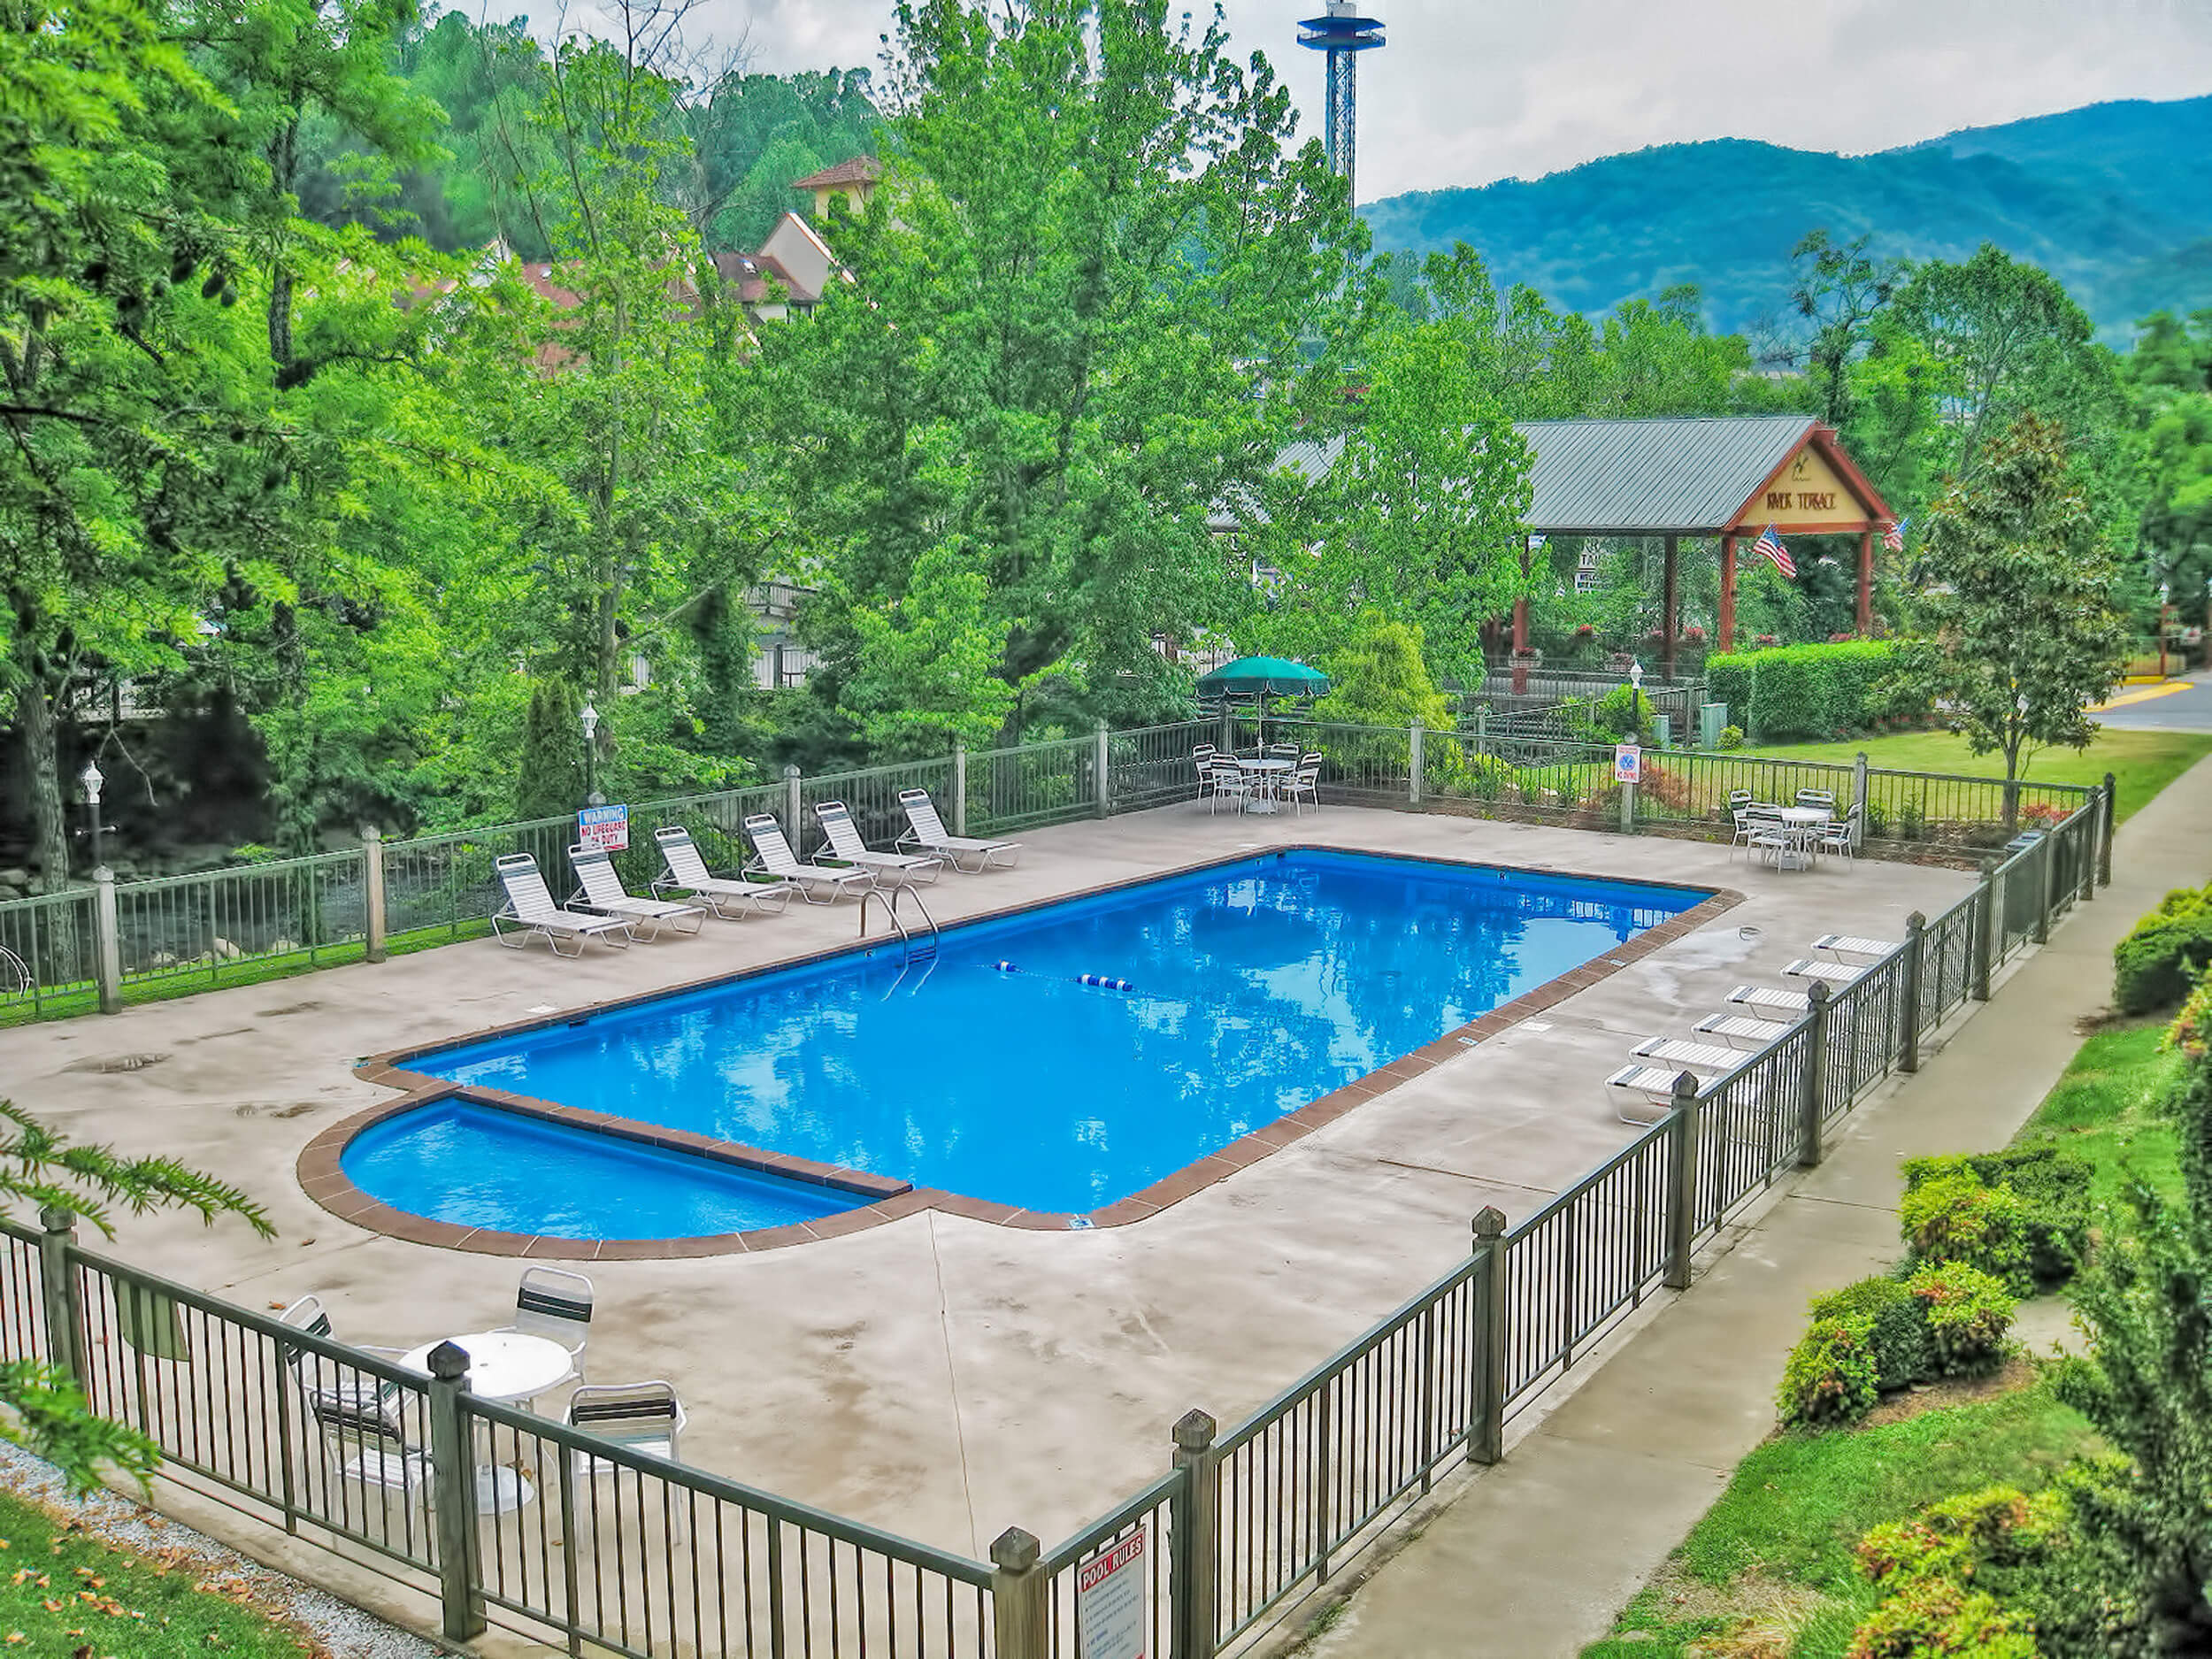 Heated outdoor pool with mountains in background at the Gatlinburg Convention Center Resort | River Terrace Resort & Convention Center | Westgate